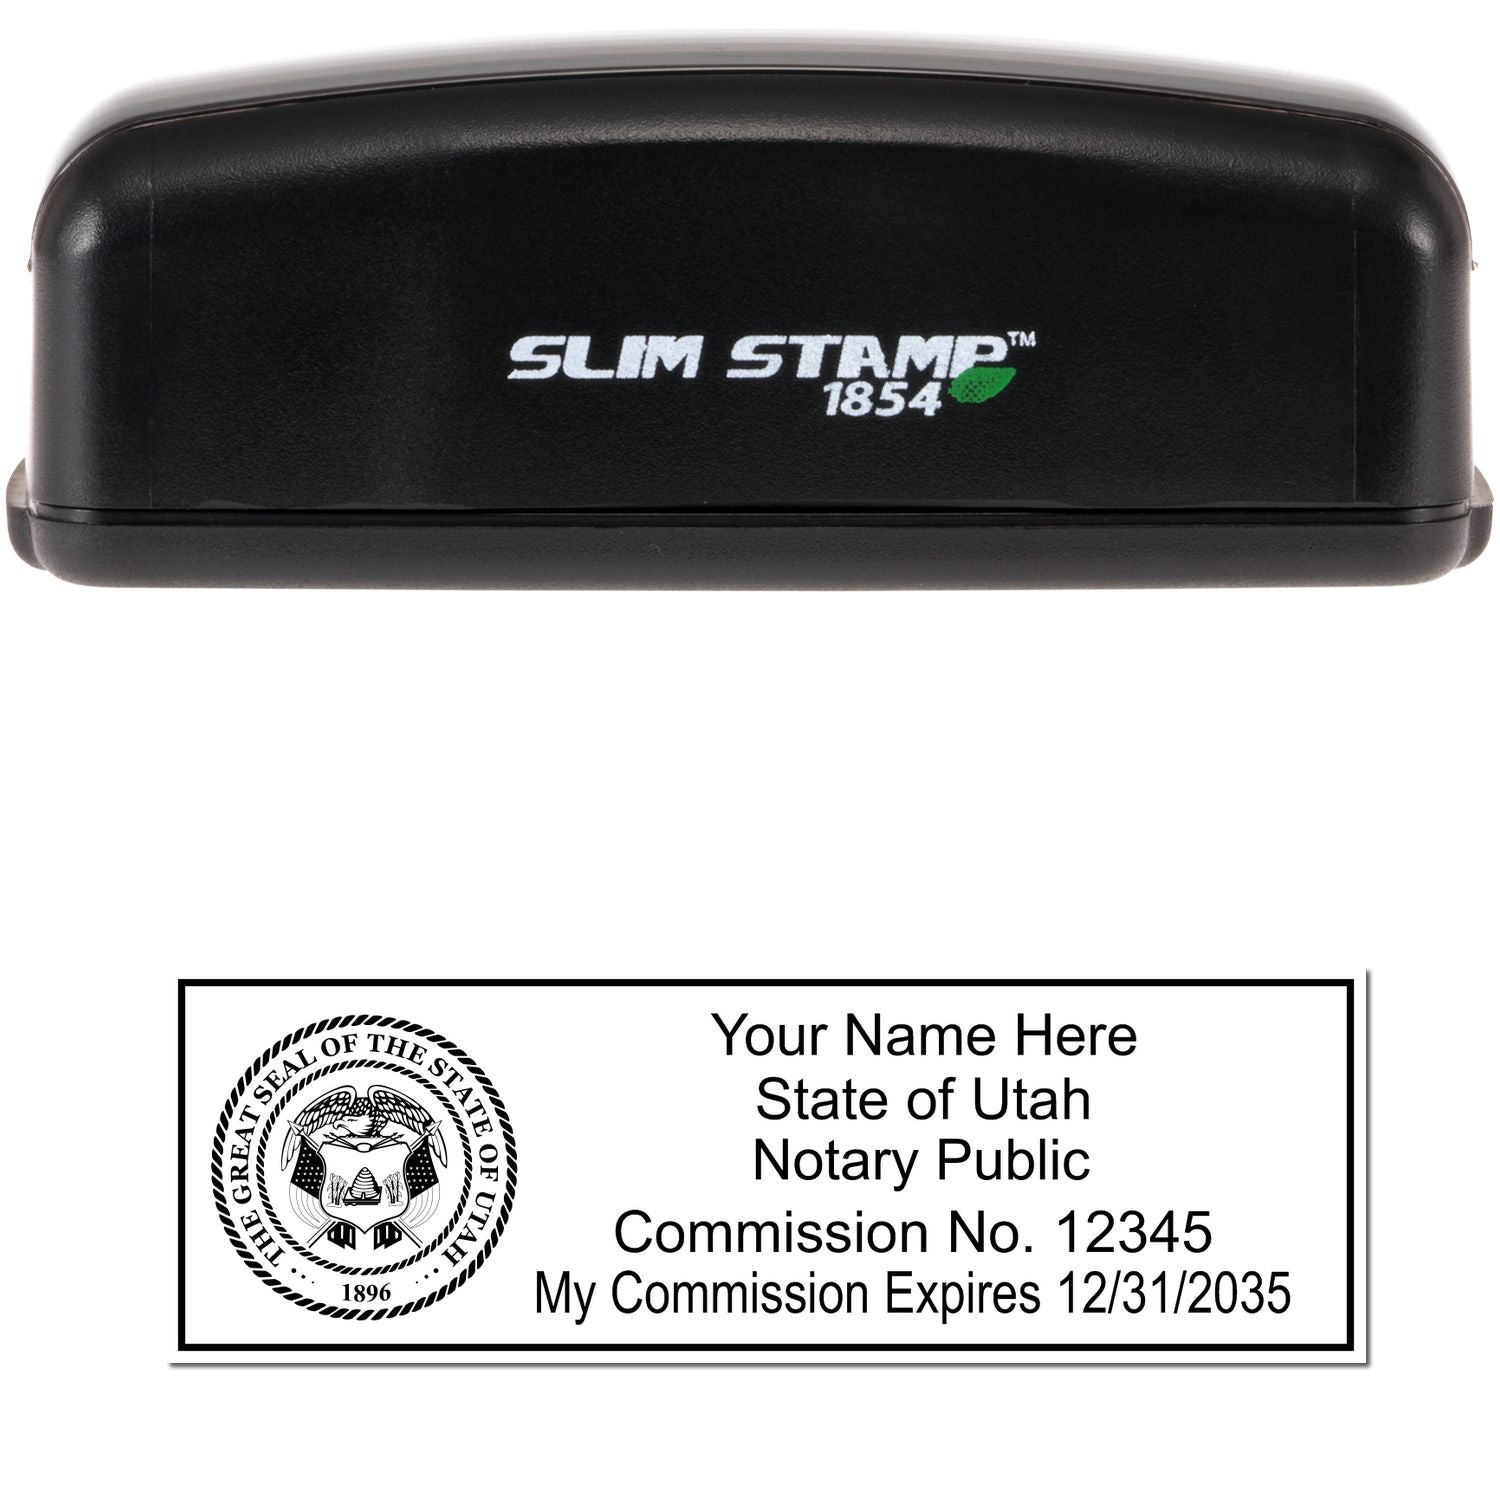 The main image for the Slim Pre-Inked State Seal Notary Stamp for Utah depicting a sample of the imprint and electronic files